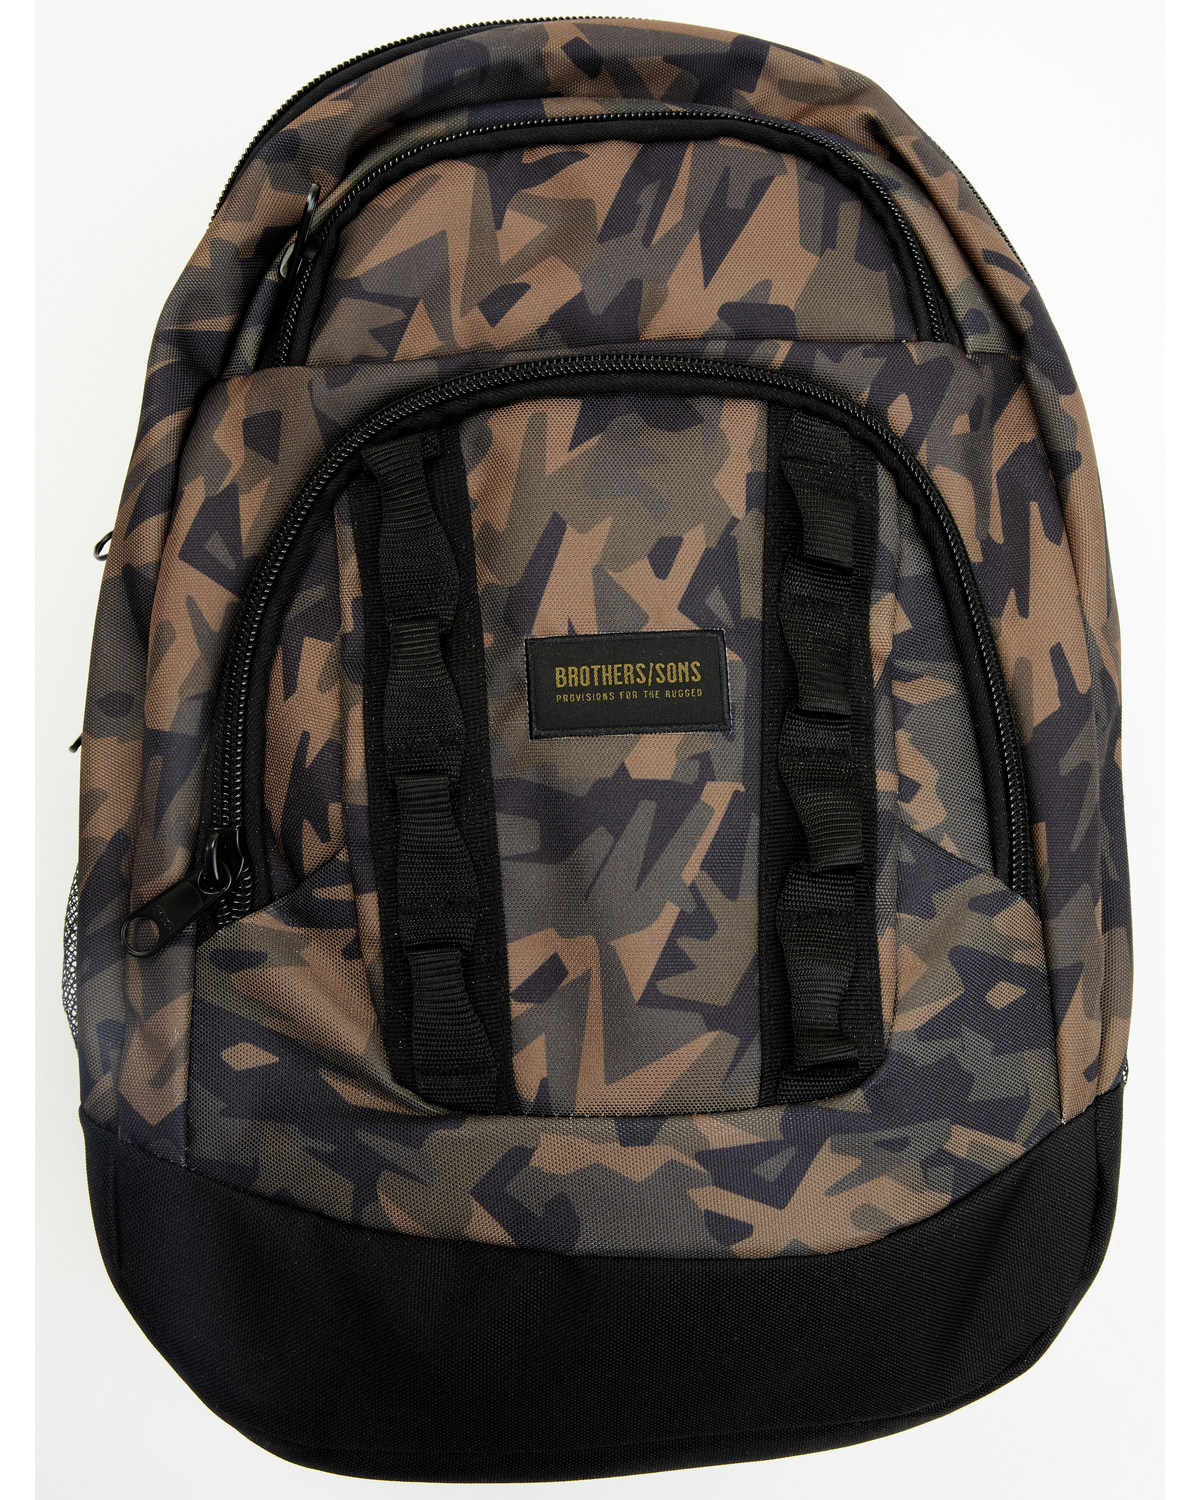 Brothers and Sons Men's Camo Print Backpack